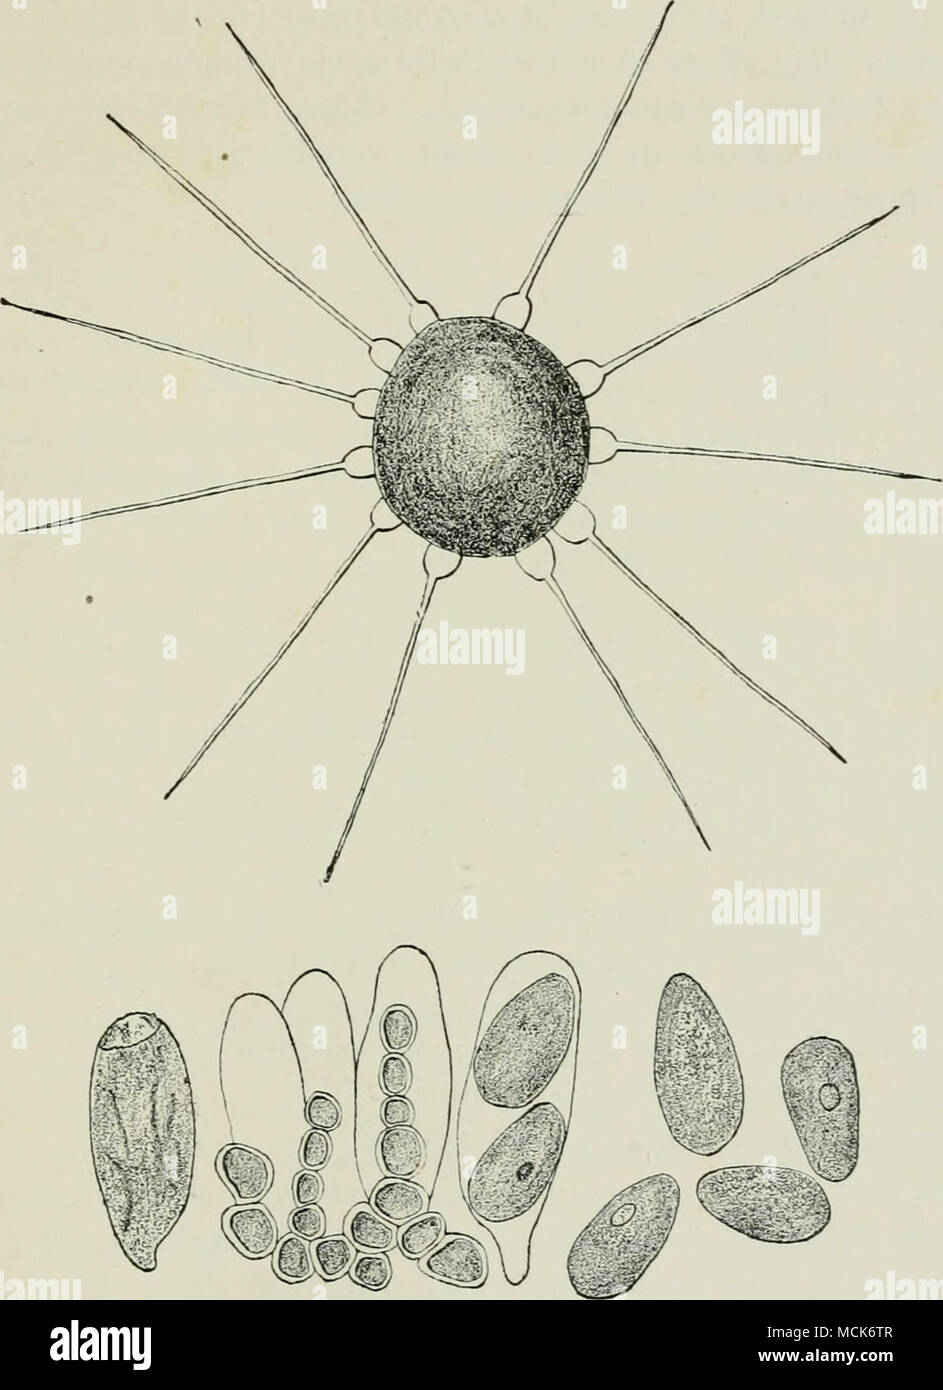 . Fig. 7i5.—Phyllacthiia suffulta from Beech. Perithecium, with characteristic appendages. Contents of the perithecium : asci, spores, and chains of cells resembling paraphyses. (v. Tubeuf del.) but occasionally find their way into fruit with broken epidermis. They are thus found carrying on secondary decay and rot, where other diseases have begun the attack. Stock Photo